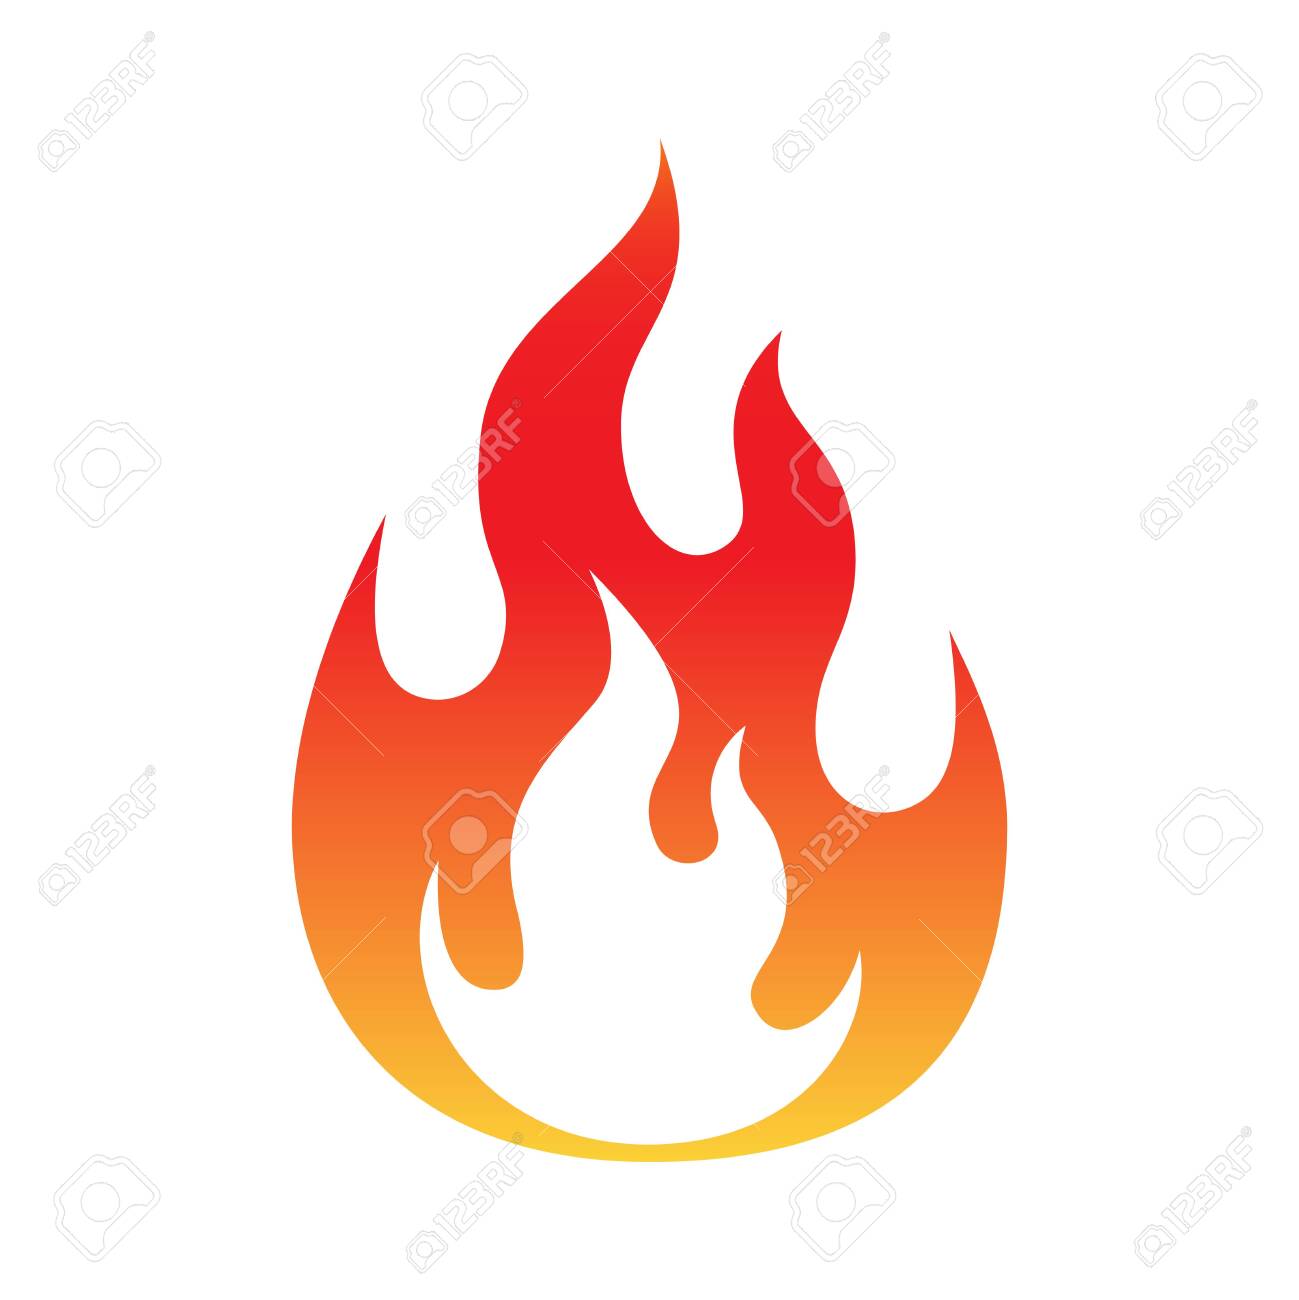 Fire Flame Images